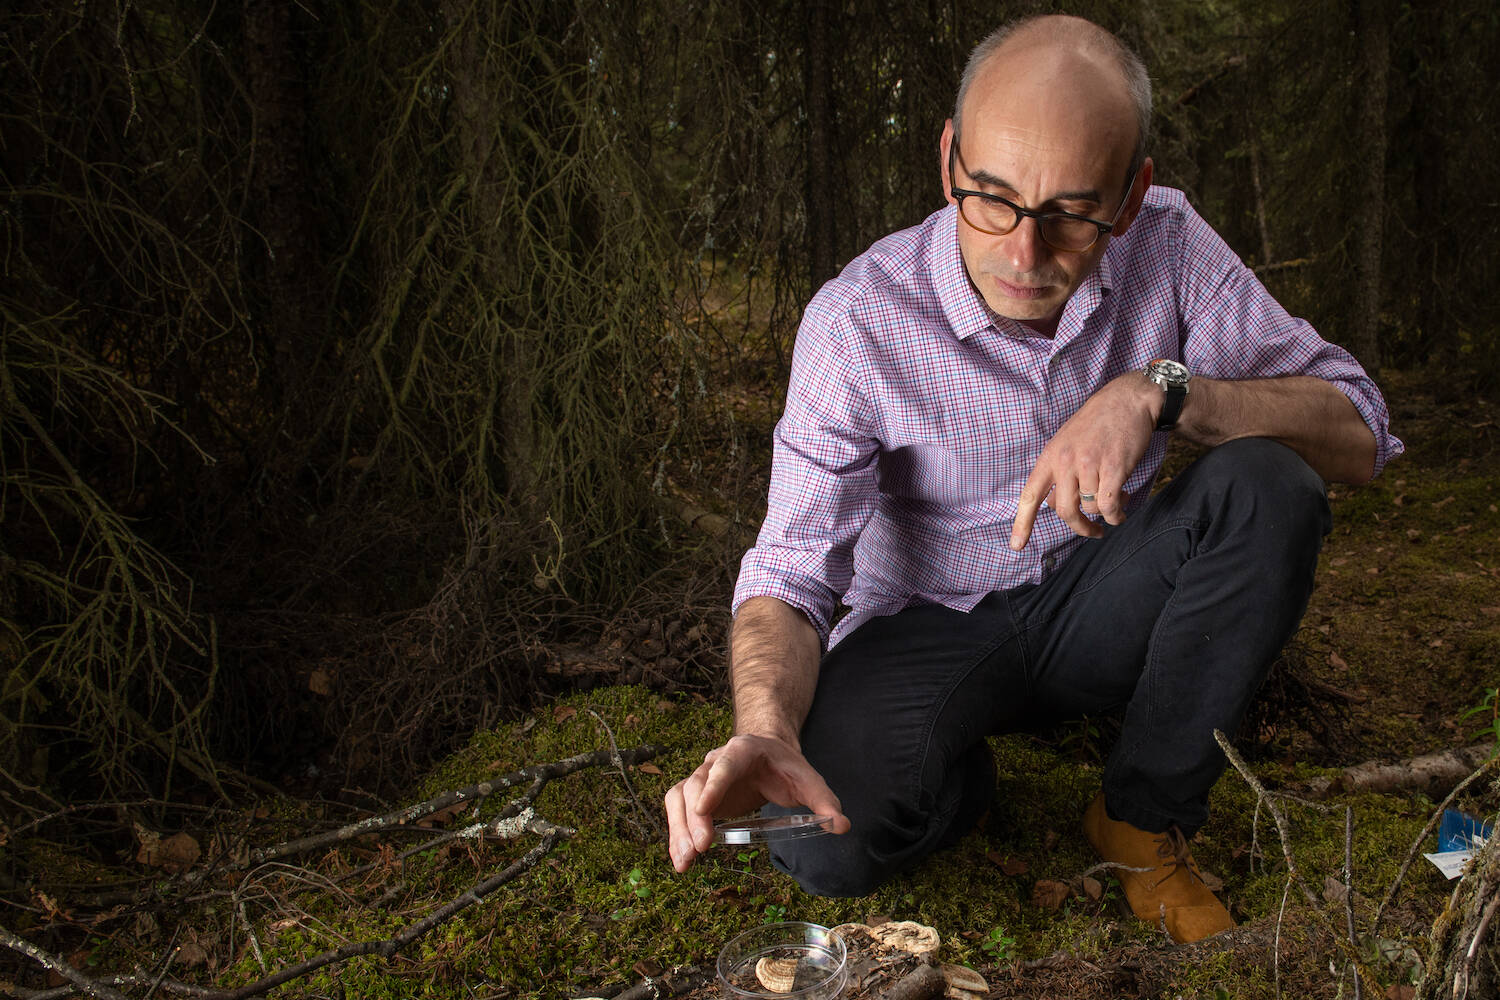 UAA associate professor of public health Philippe Amstislavski collects samples of some of the fungi found in the forests around UAA which are similar to those his team has used to develop a lightweight packaging alternative to Styrofoam. (Courtesy Photo /  James R. Evans, University of Alaska Anchorage)